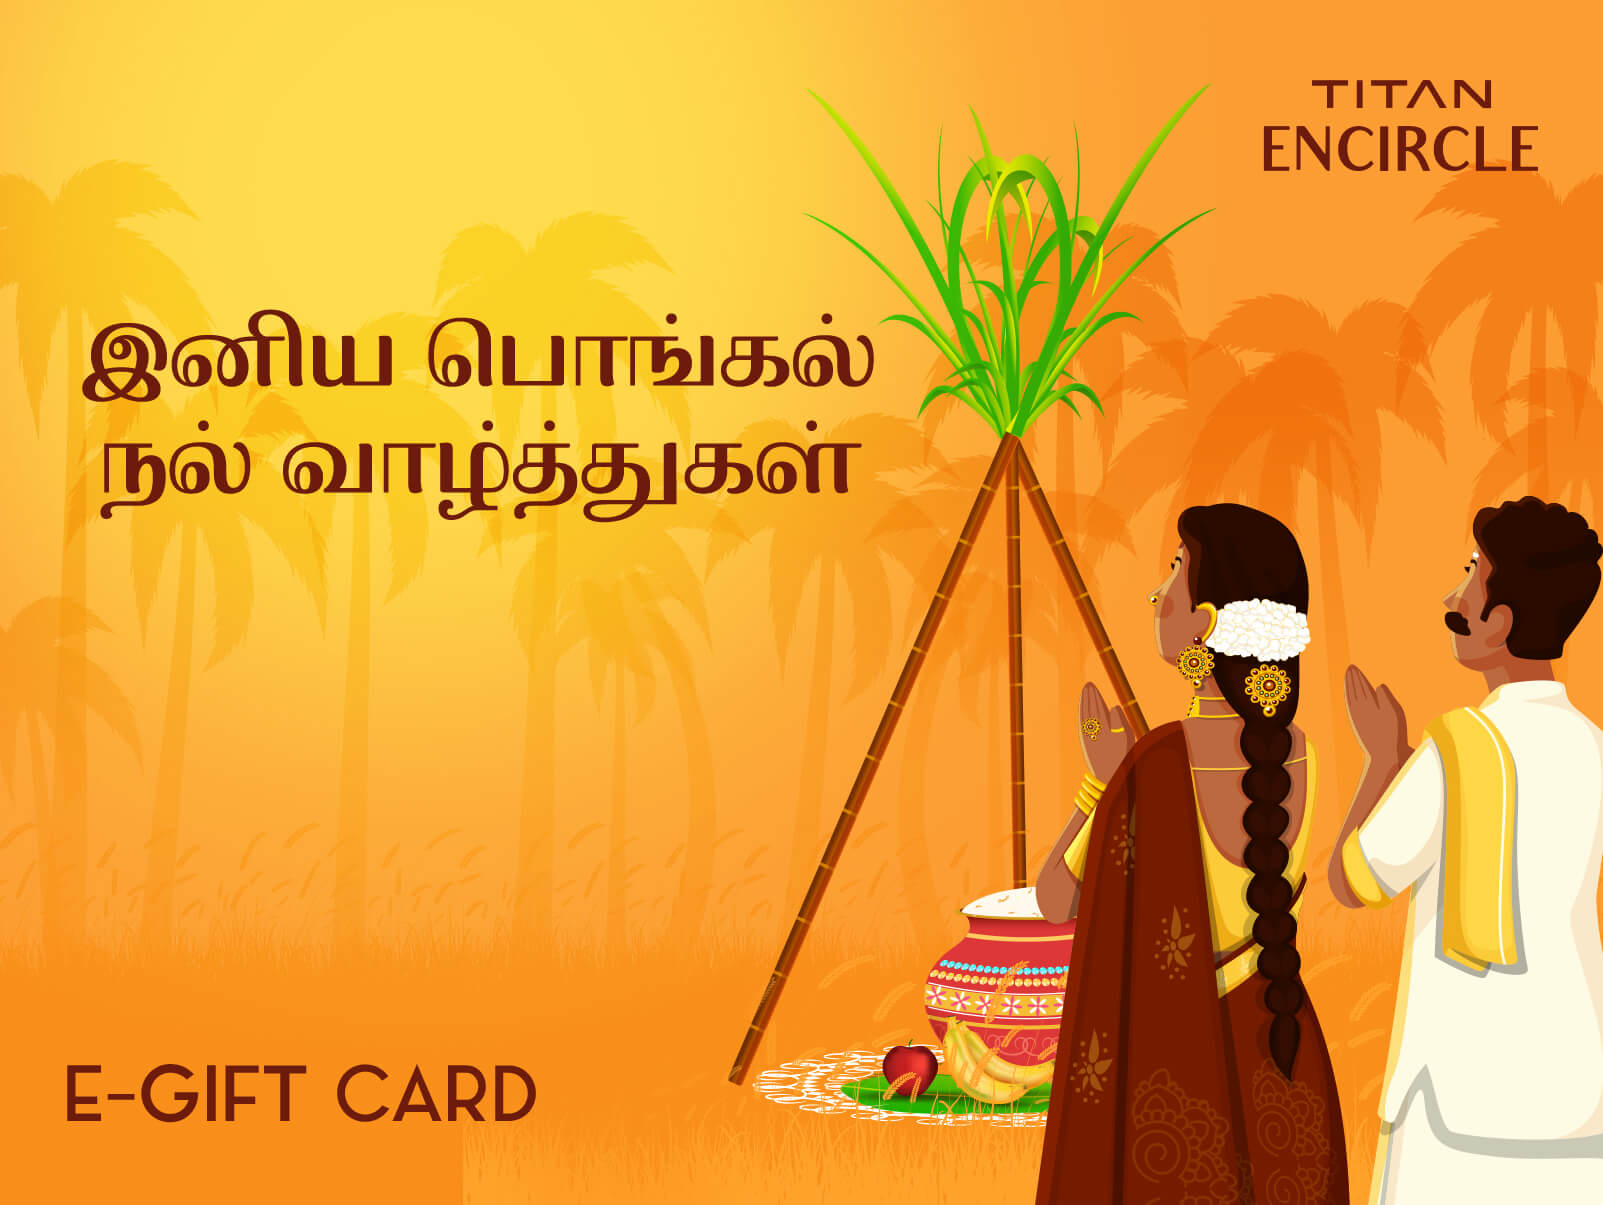 Shop Gift Card on Pongal